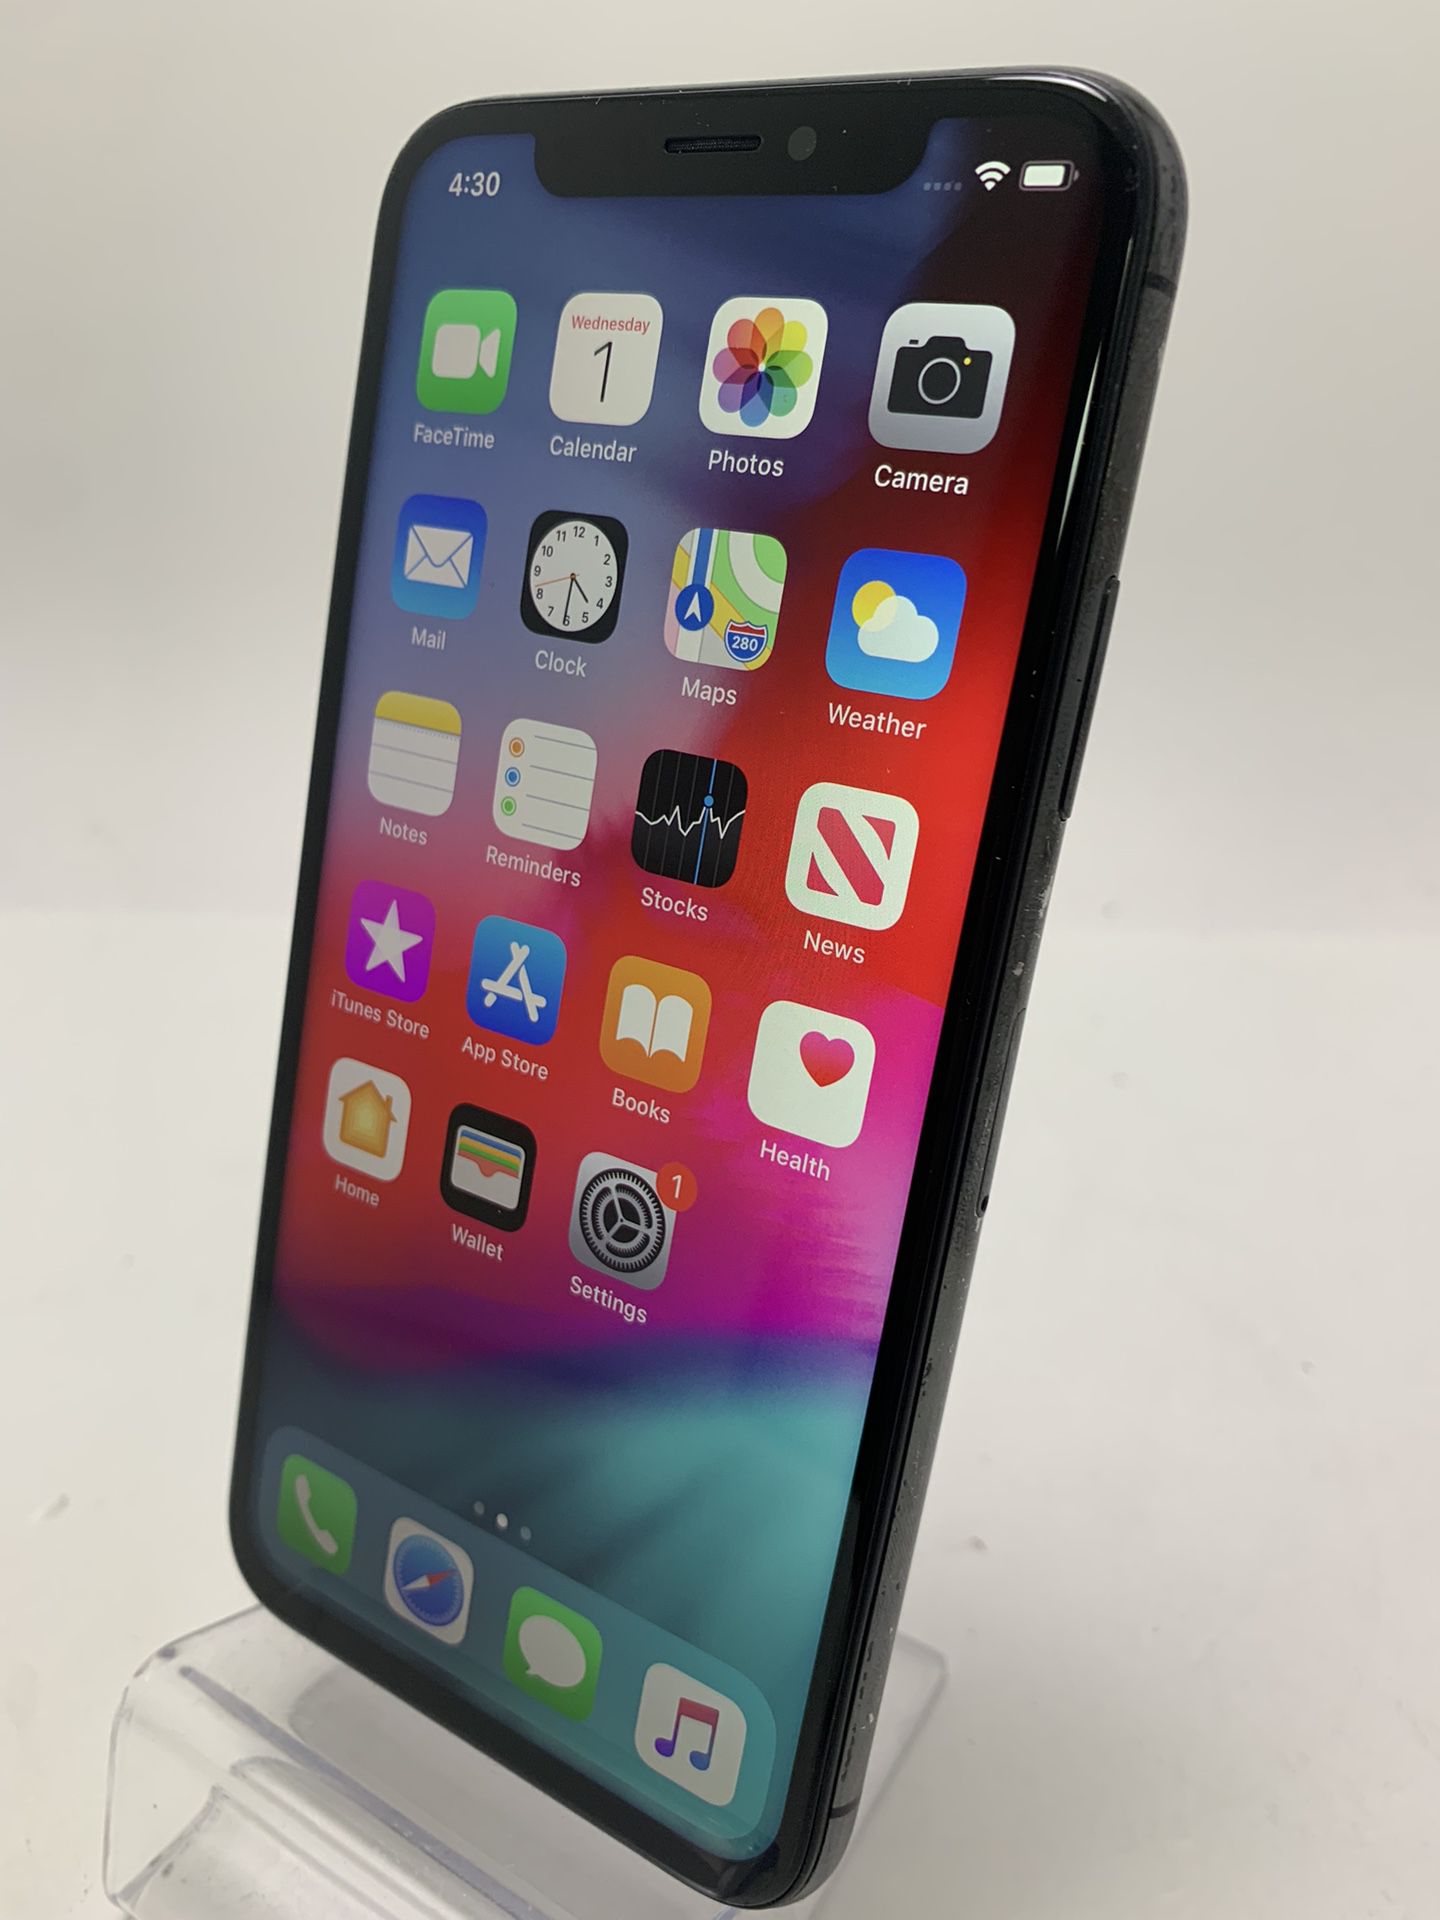 Apple iPhone X Space Gray 64GB UNLOCKED With 30  Day Warranty 